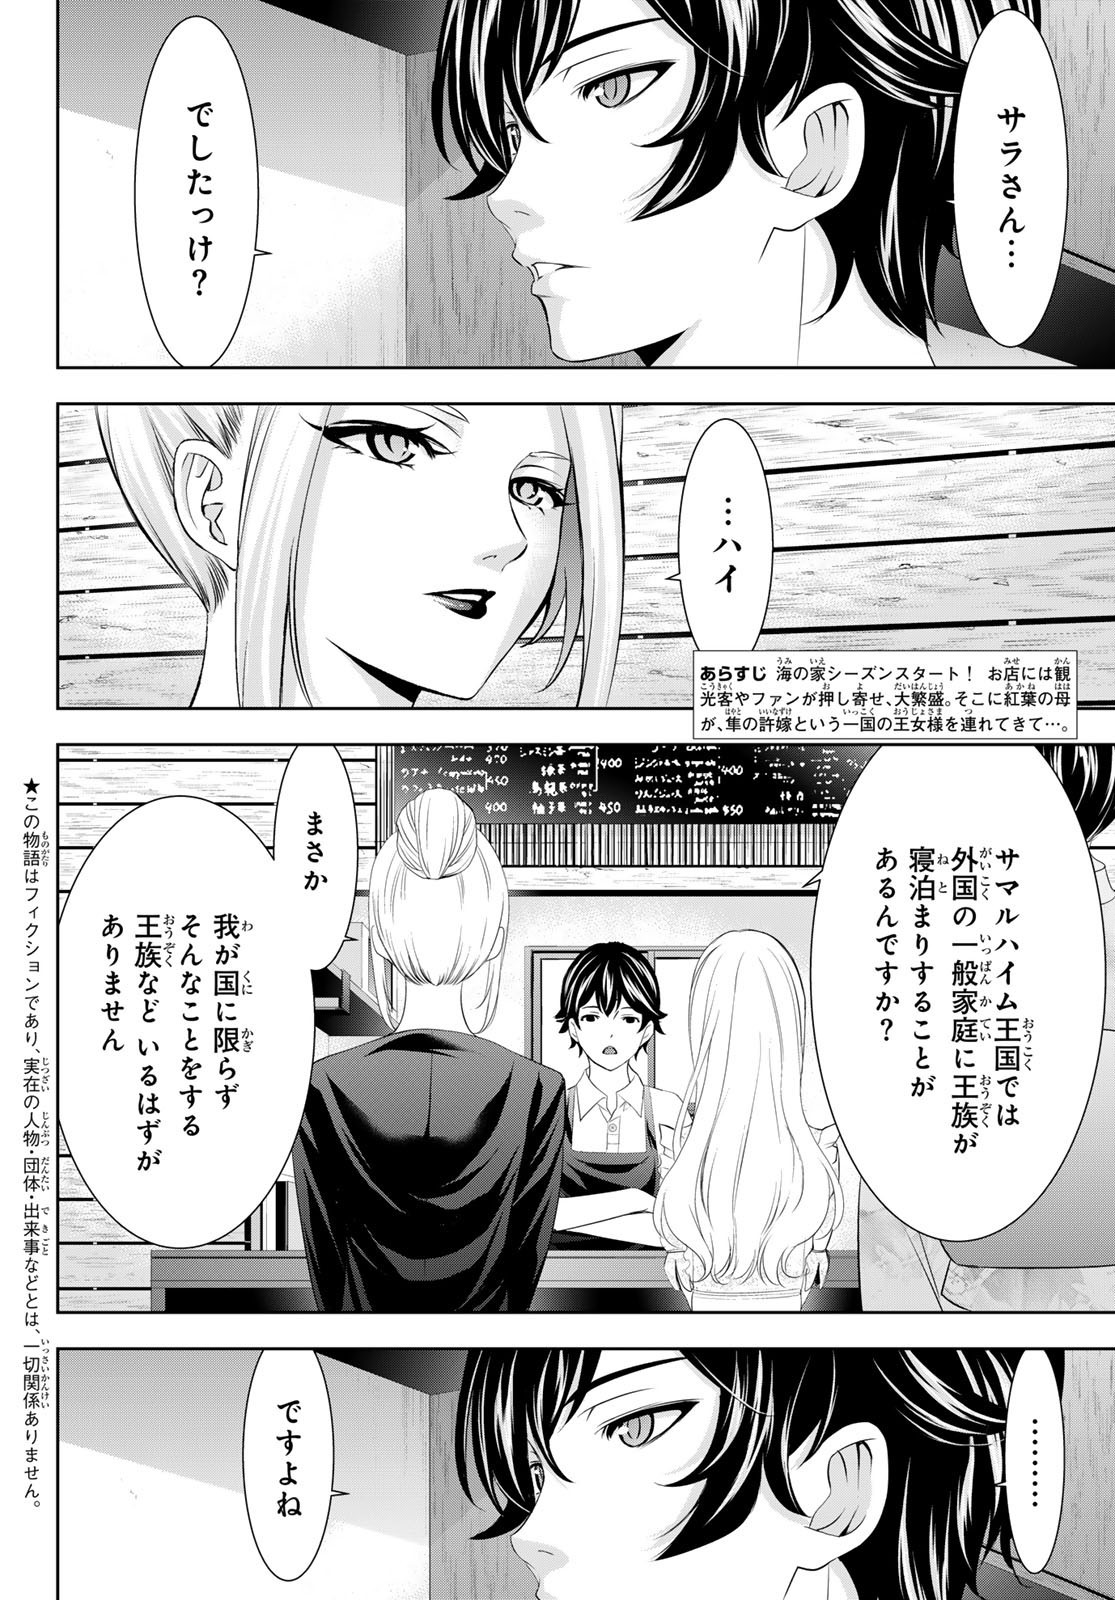 Goddess-Cafe-Terrace - Chapter 137 - Page 2